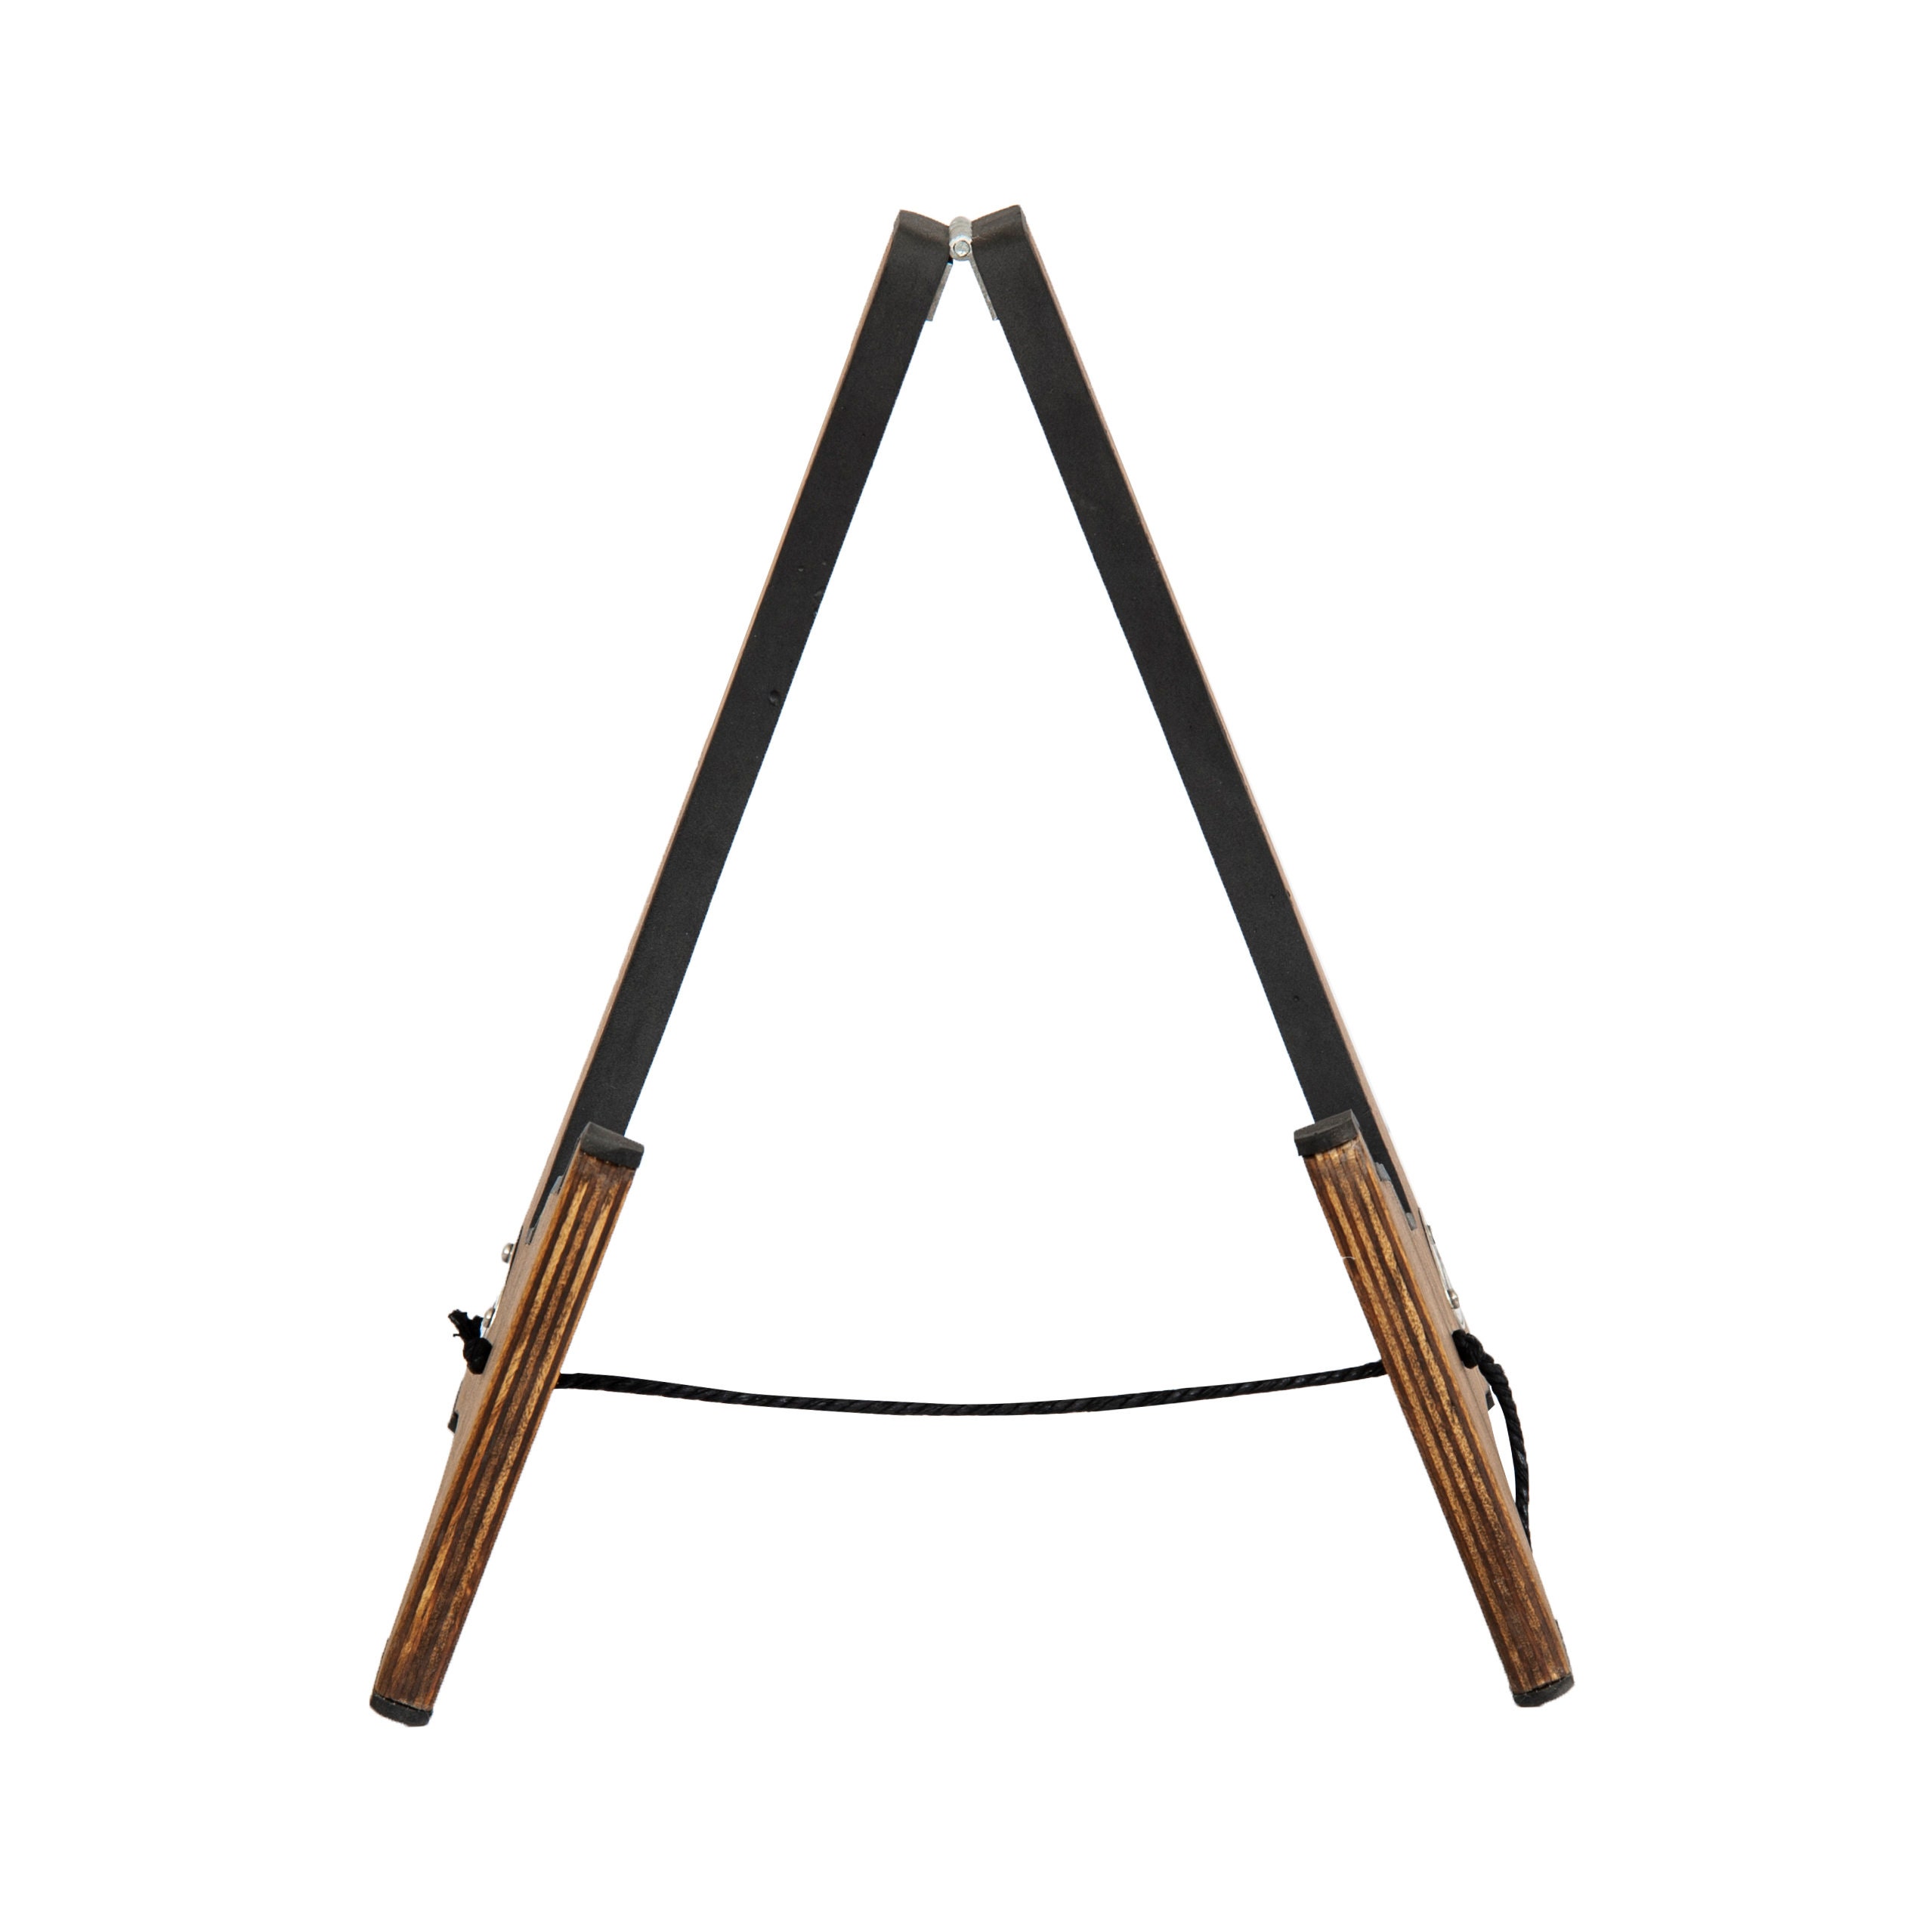  T-LoVendo 5.789 Universal Folding Floor Stand for Spanish  Electric Acoustic Guitar : Instrumentos Musicales